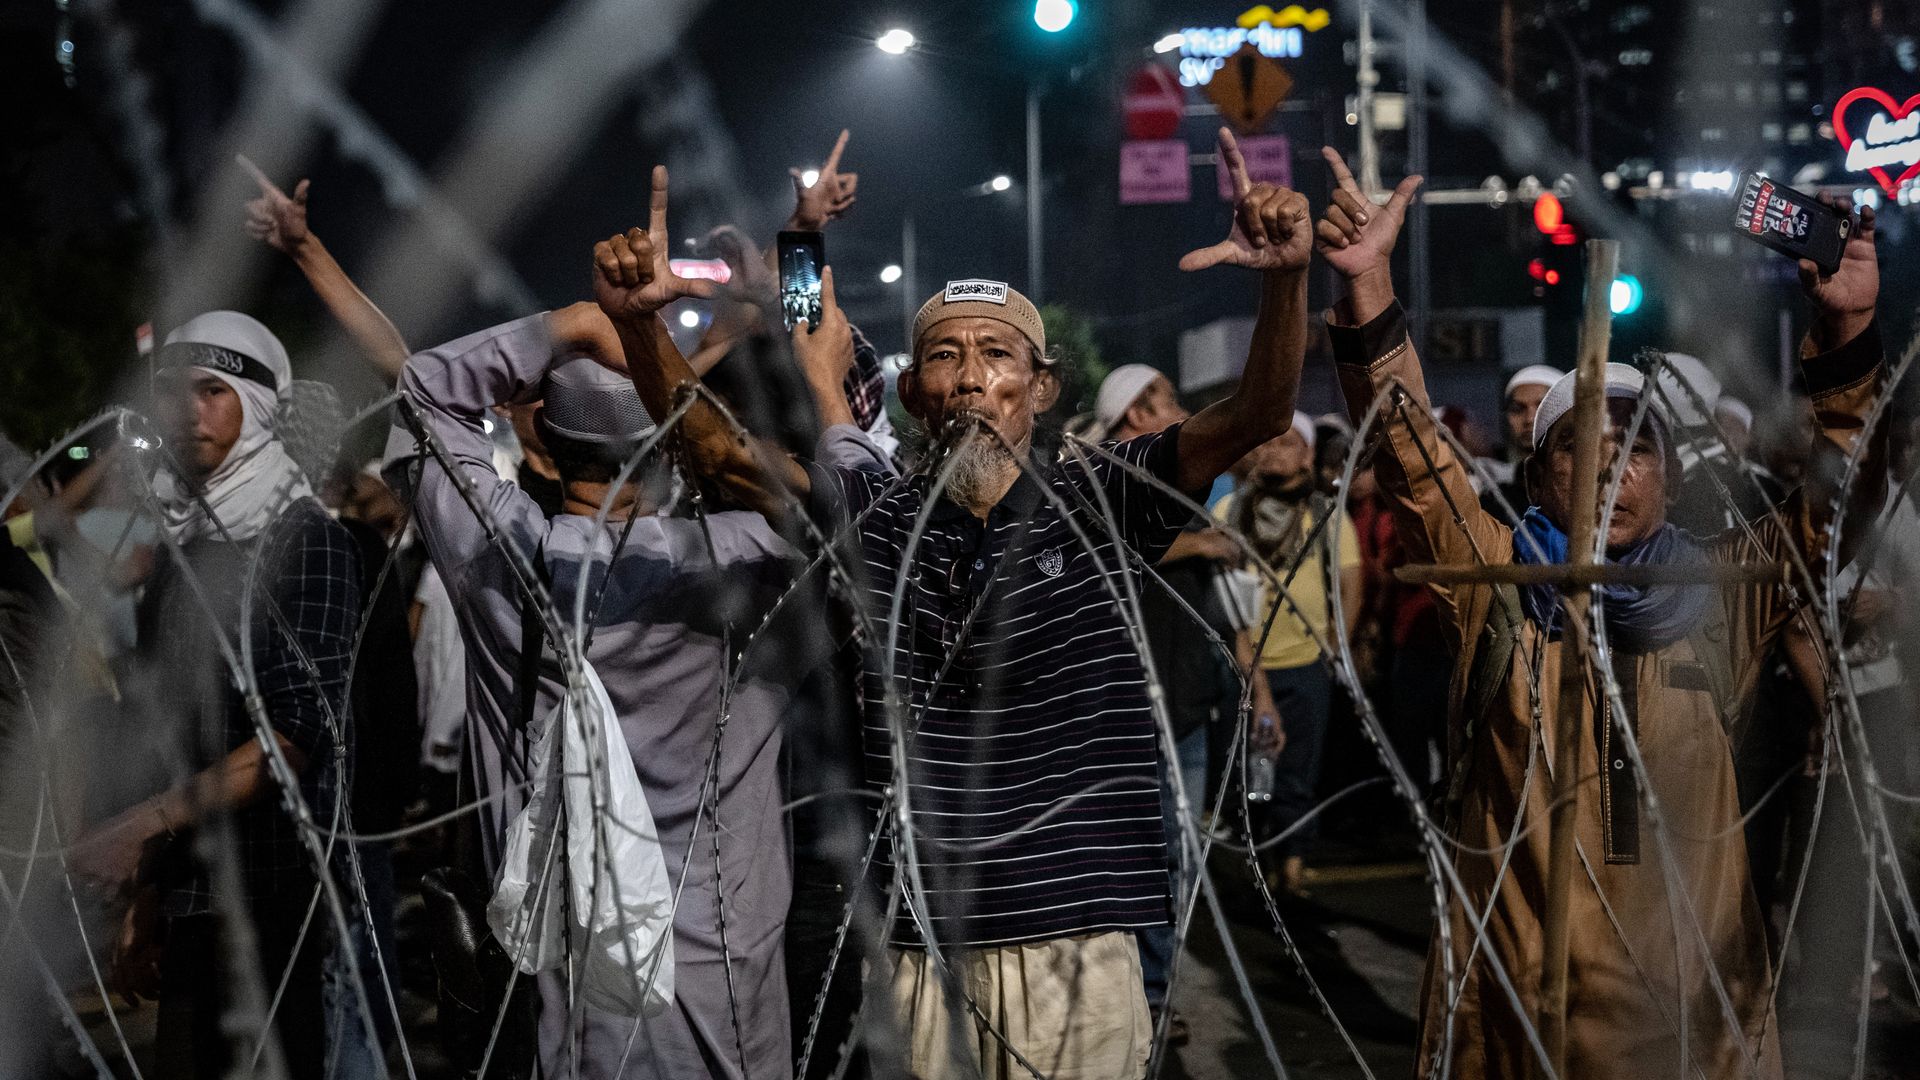 Protesters demonstrate in front of the Elections Supervisory Agency (Bawaslu) after the official government election results were announced on May 21, 2019 in Jakarta, Indonesia.